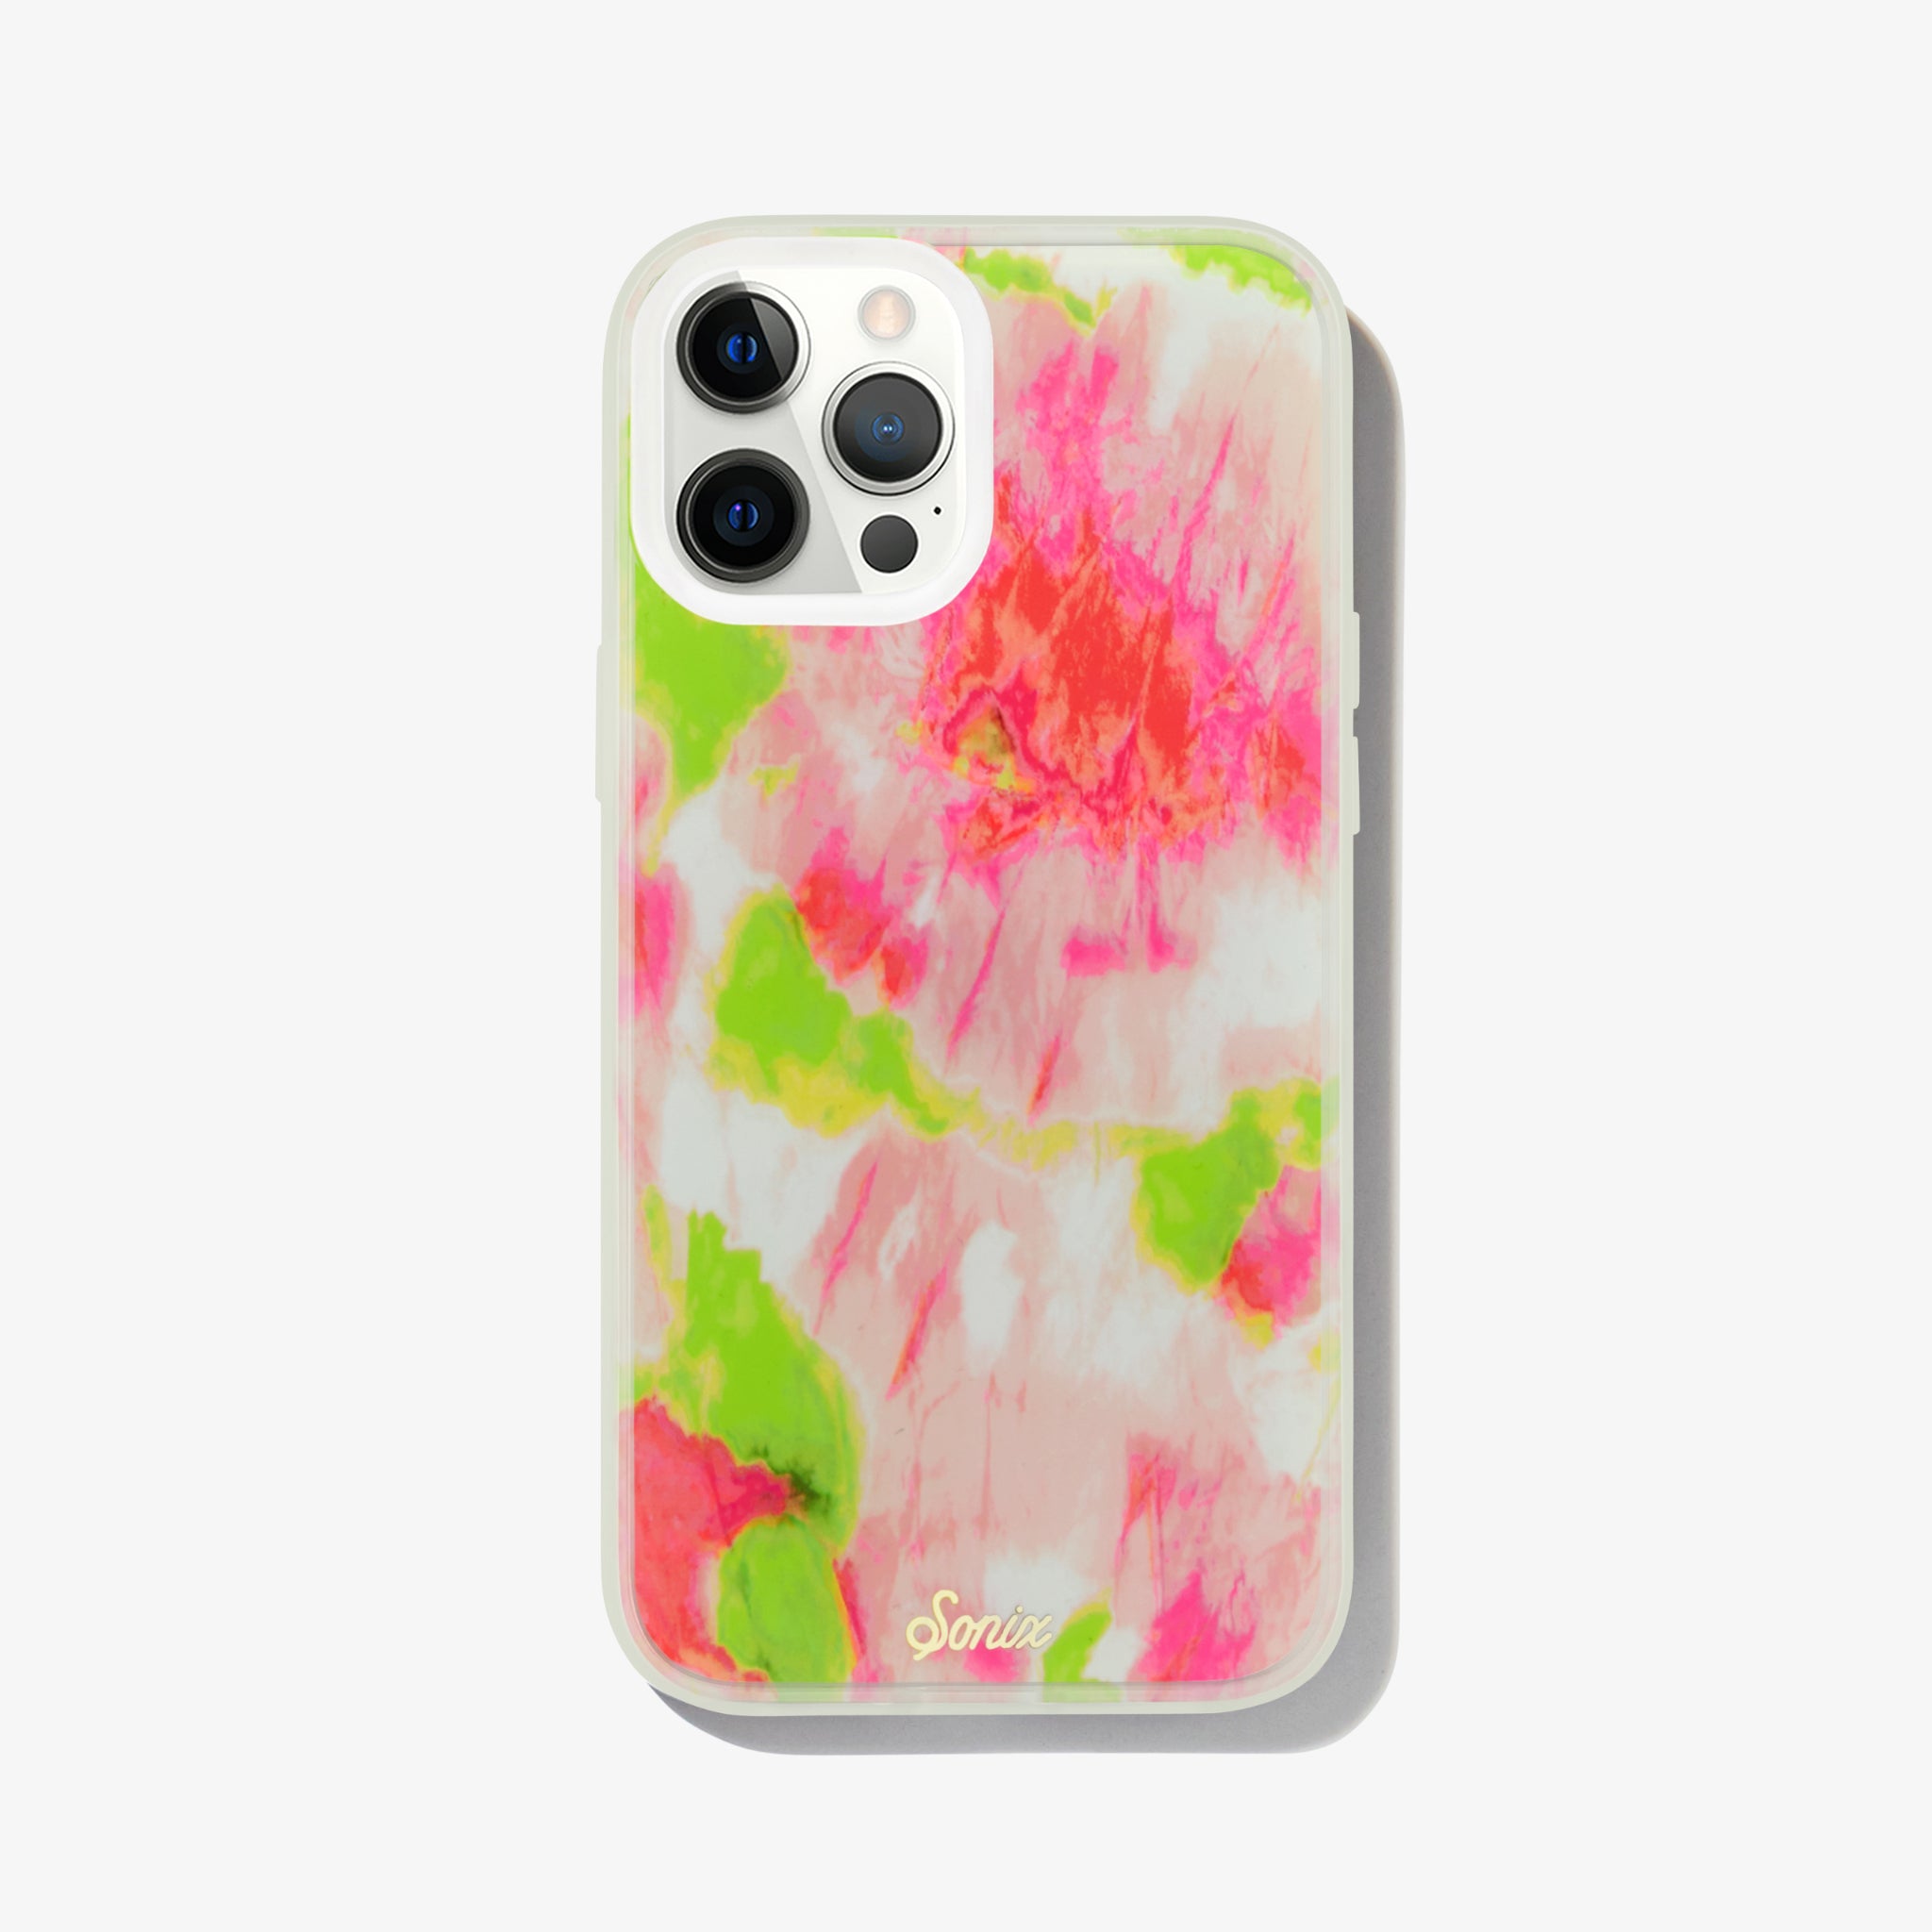 Watermelon Glow iPhone Case - Glow in the dark bumper with pink and green paint splots across the case